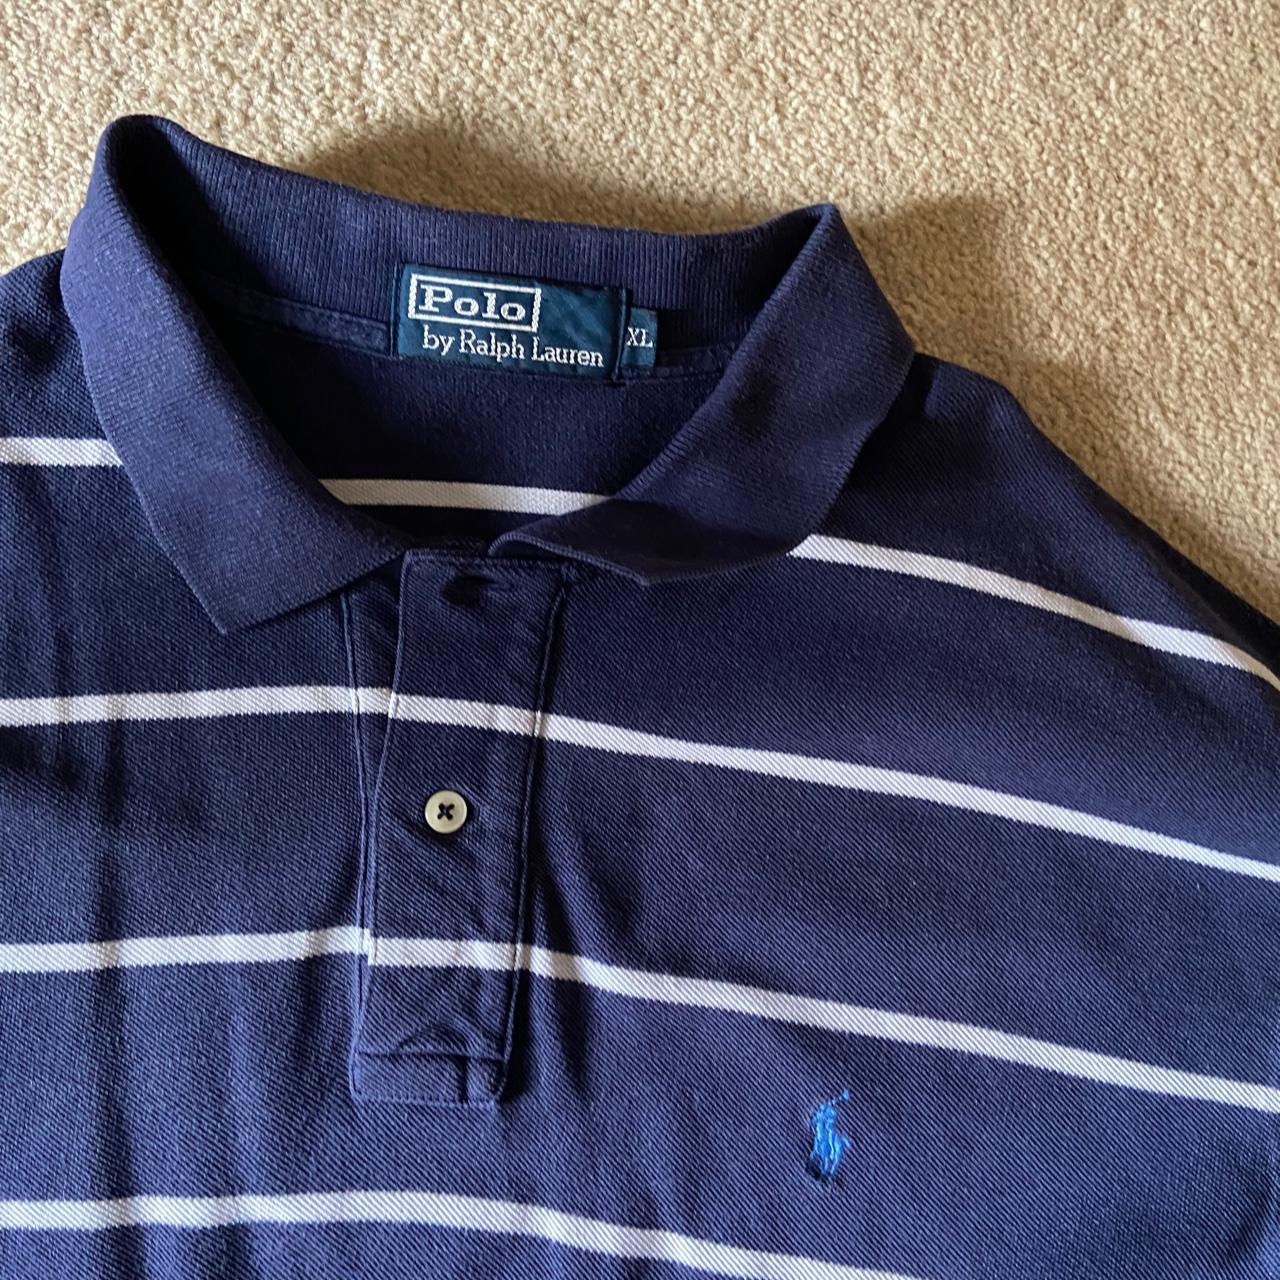 Pre-loved vintage Ralph Lauren polo shirt. This polo... - Depop